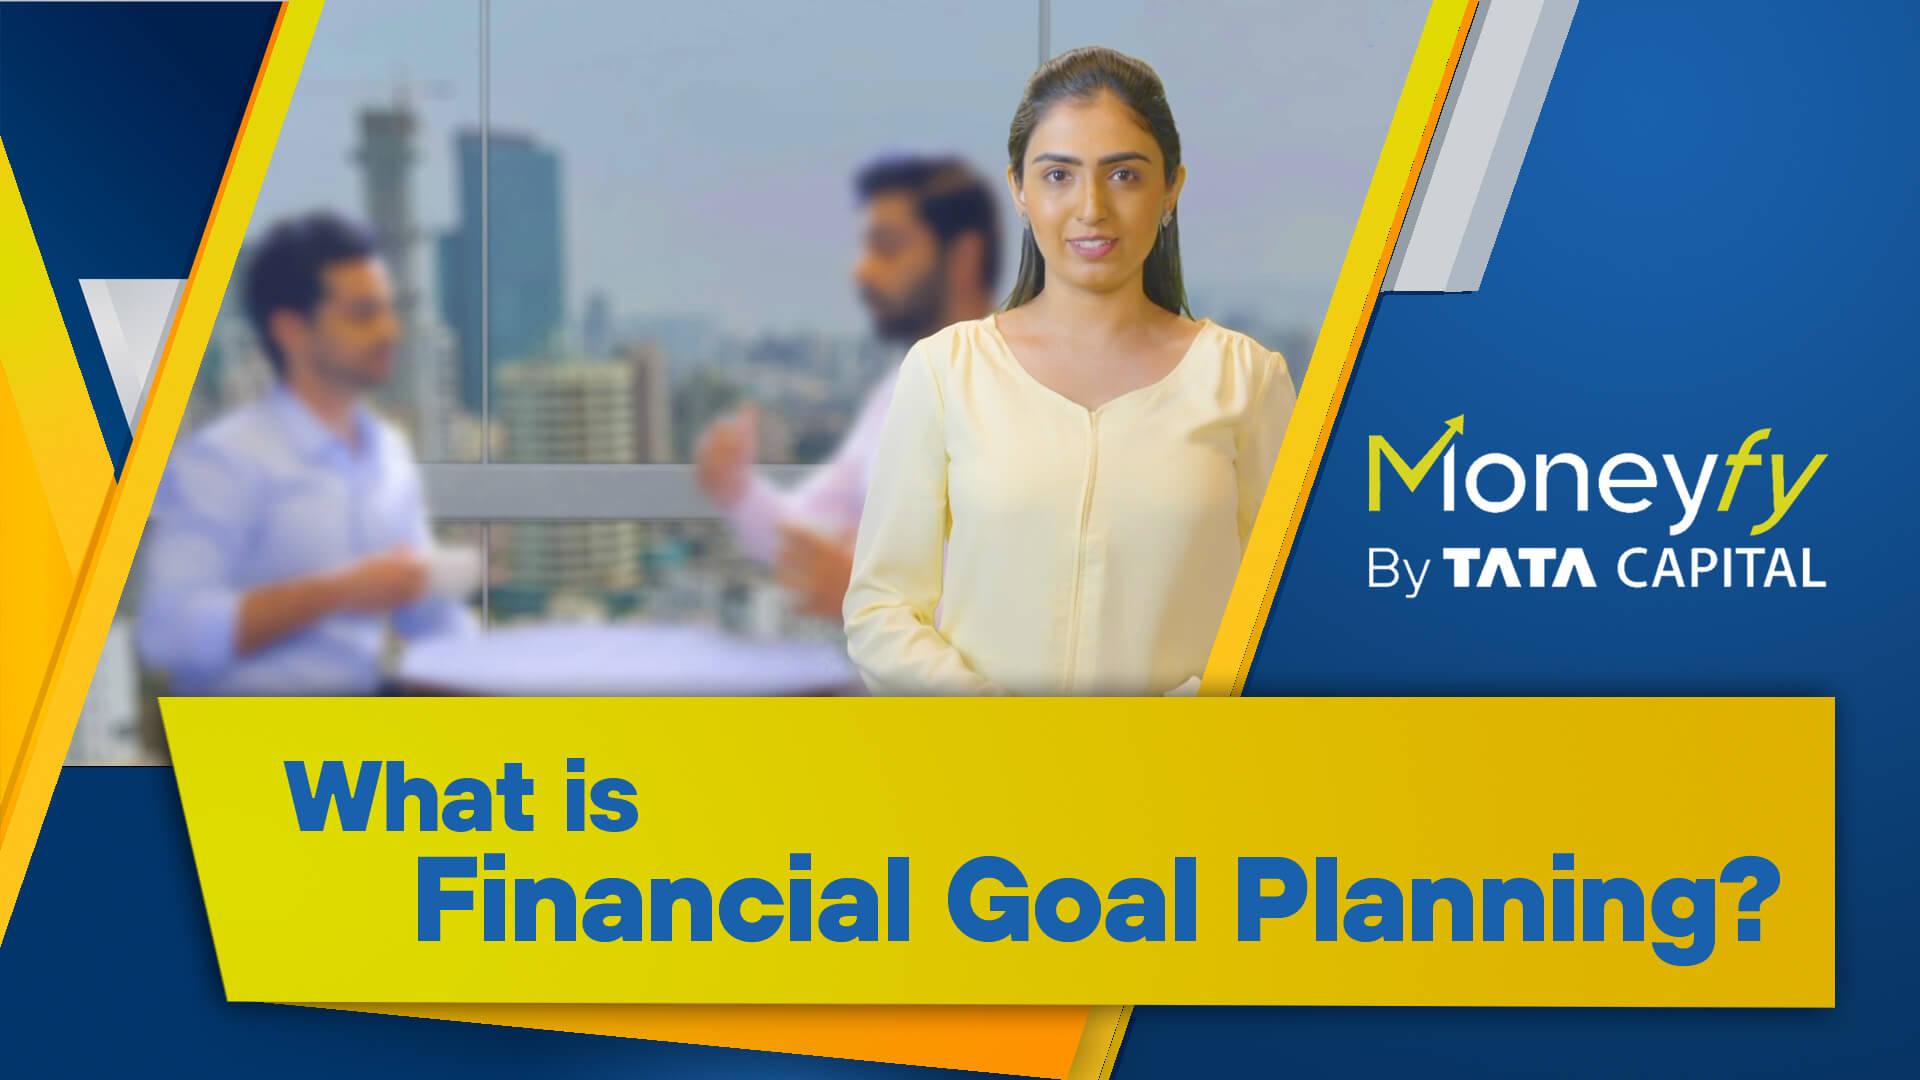 Tips for financial goal planning